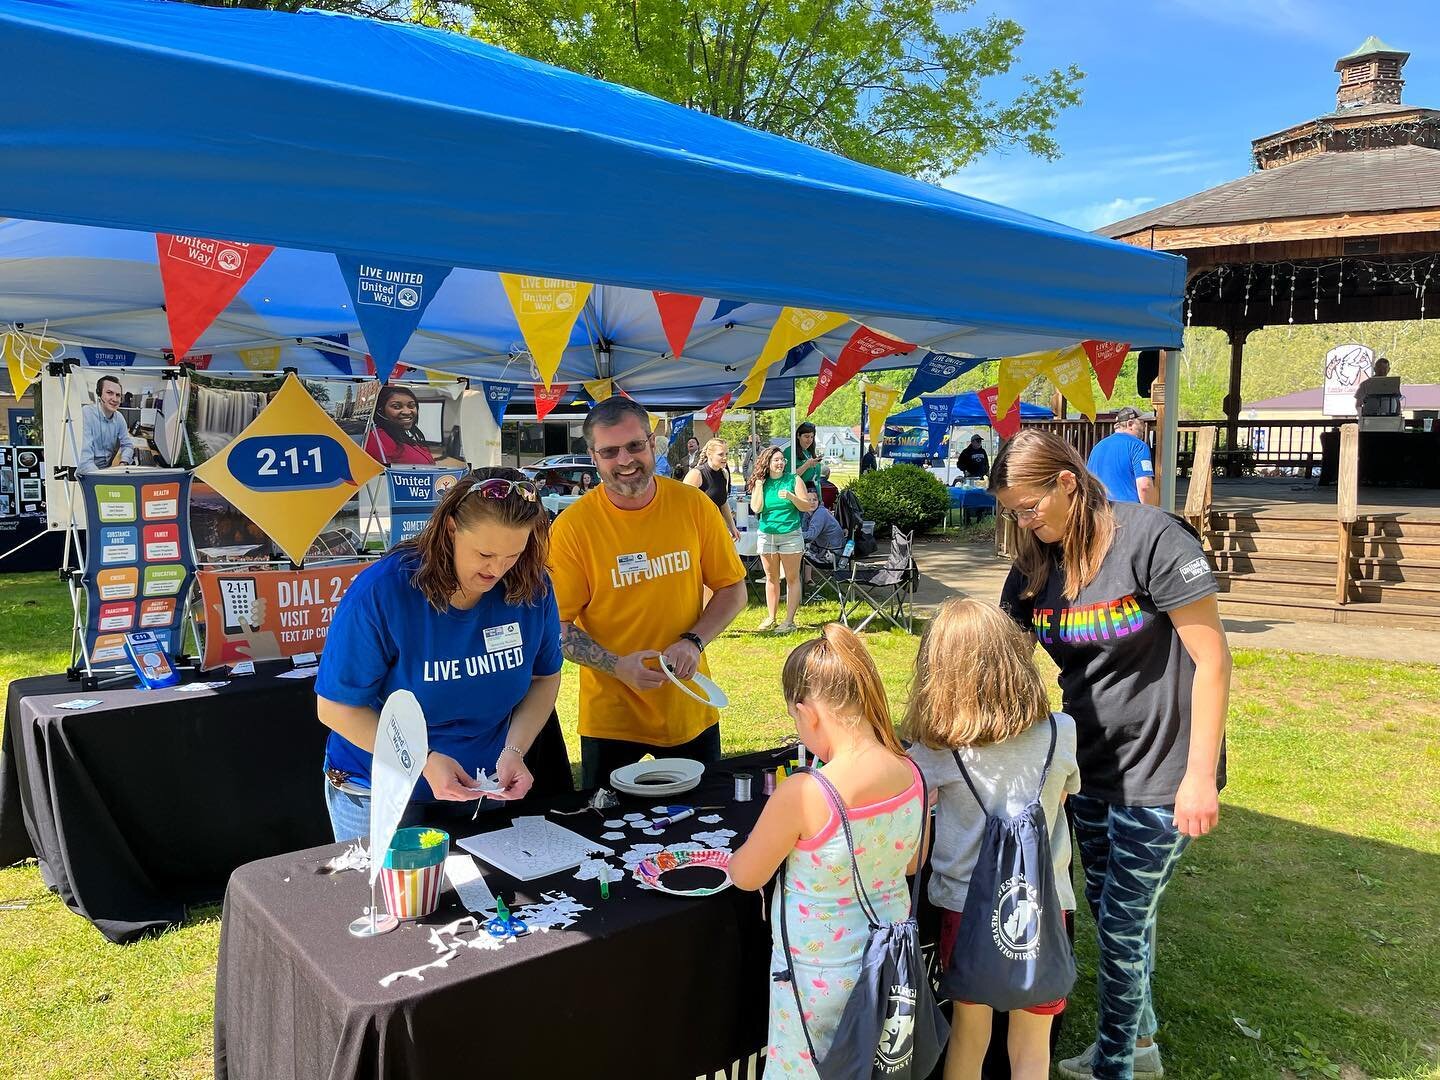 Our Impact Team had a busy weekend full of community events! 😃

Last Friday, we attended the Wood County Community Baby Shower hosted by the Healthy Community Coalition, and then we spent Friday evening at First Friday with Marietta Main Street!

Sa